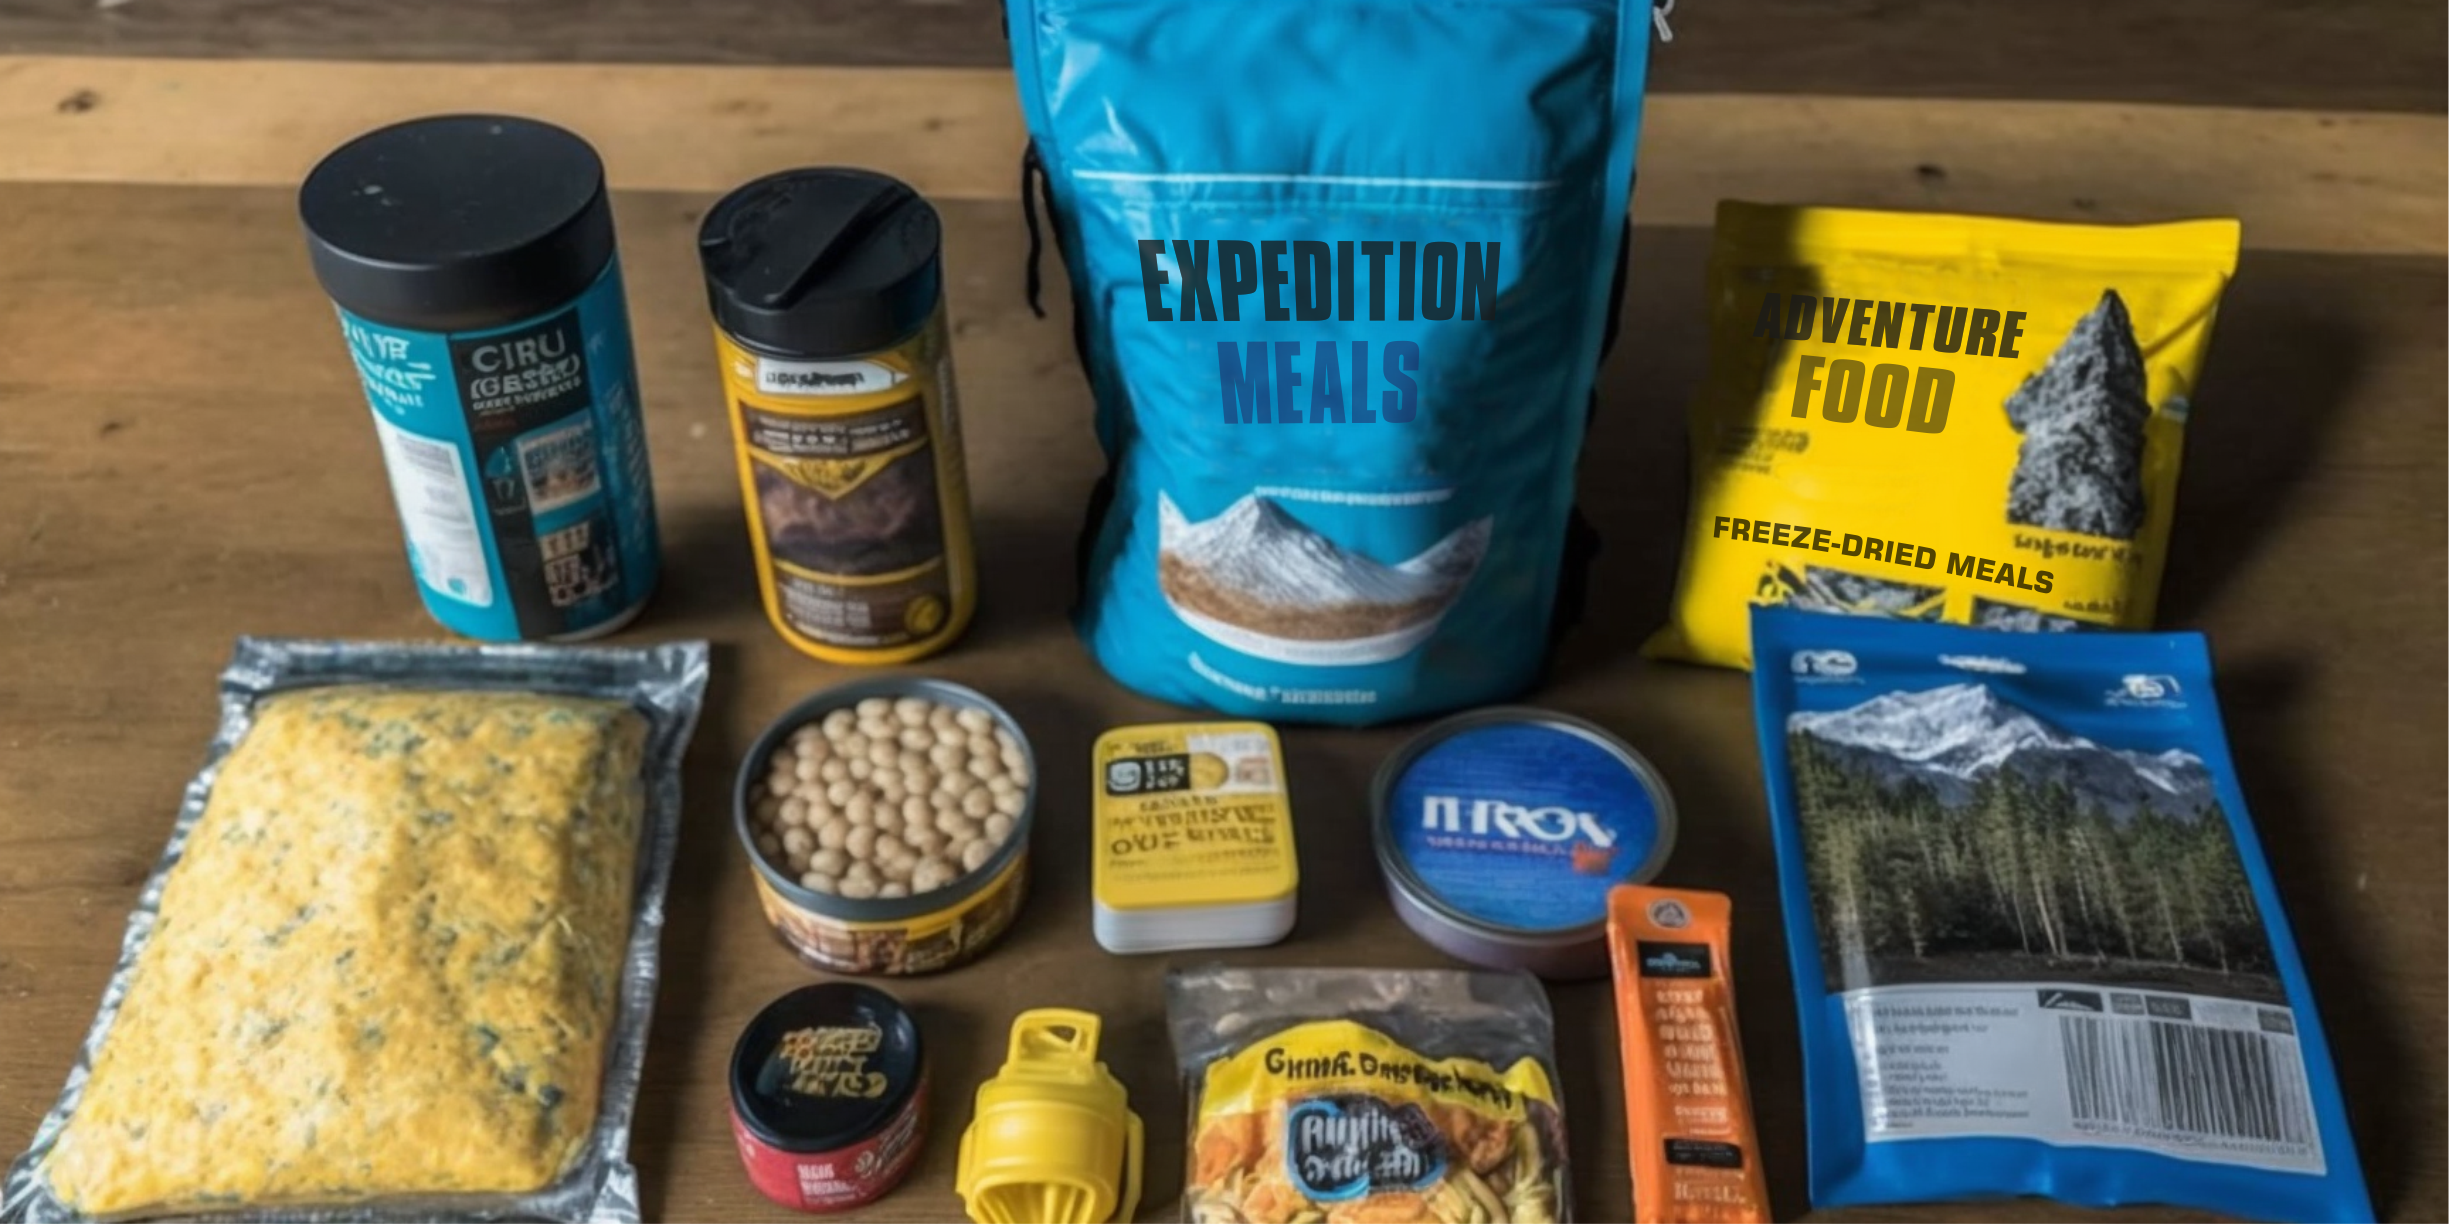 How to Plan Nutritious and Delicious Meals for Multi-Day Expeditions